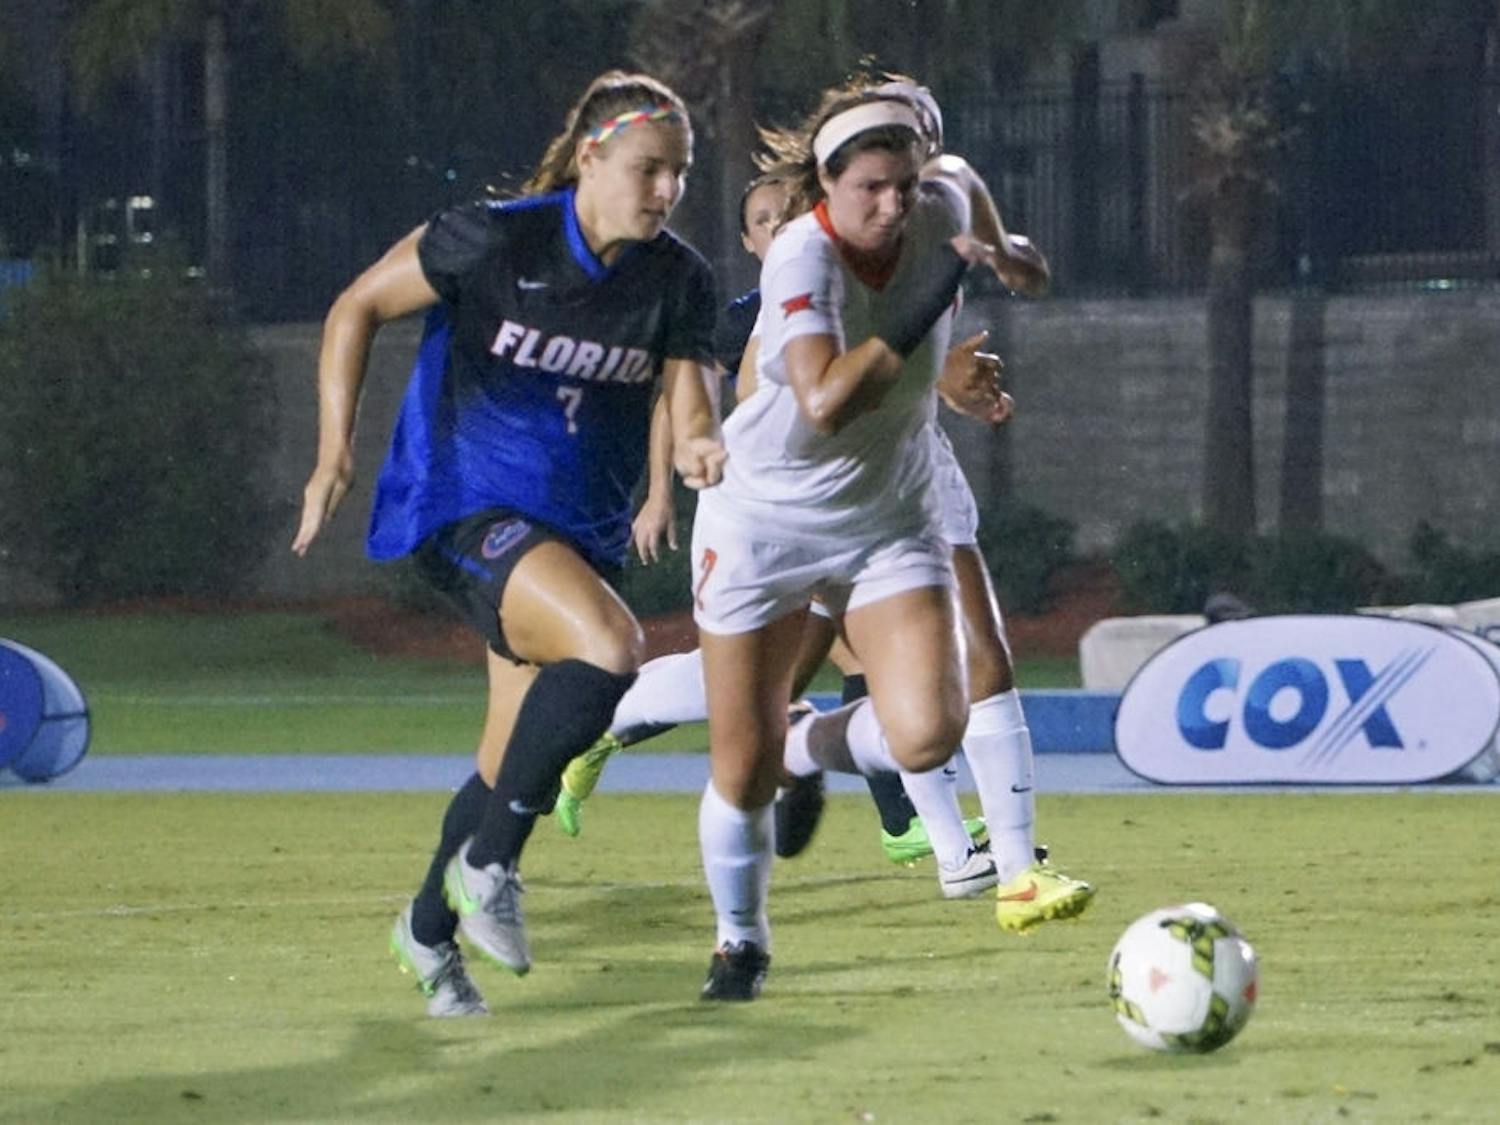 UF forward Savannah Jordan chases after the ball during Florida's 3-2 win against Oklahoma State on Sept. 4, 2015, at James G. Pressly Stadium.